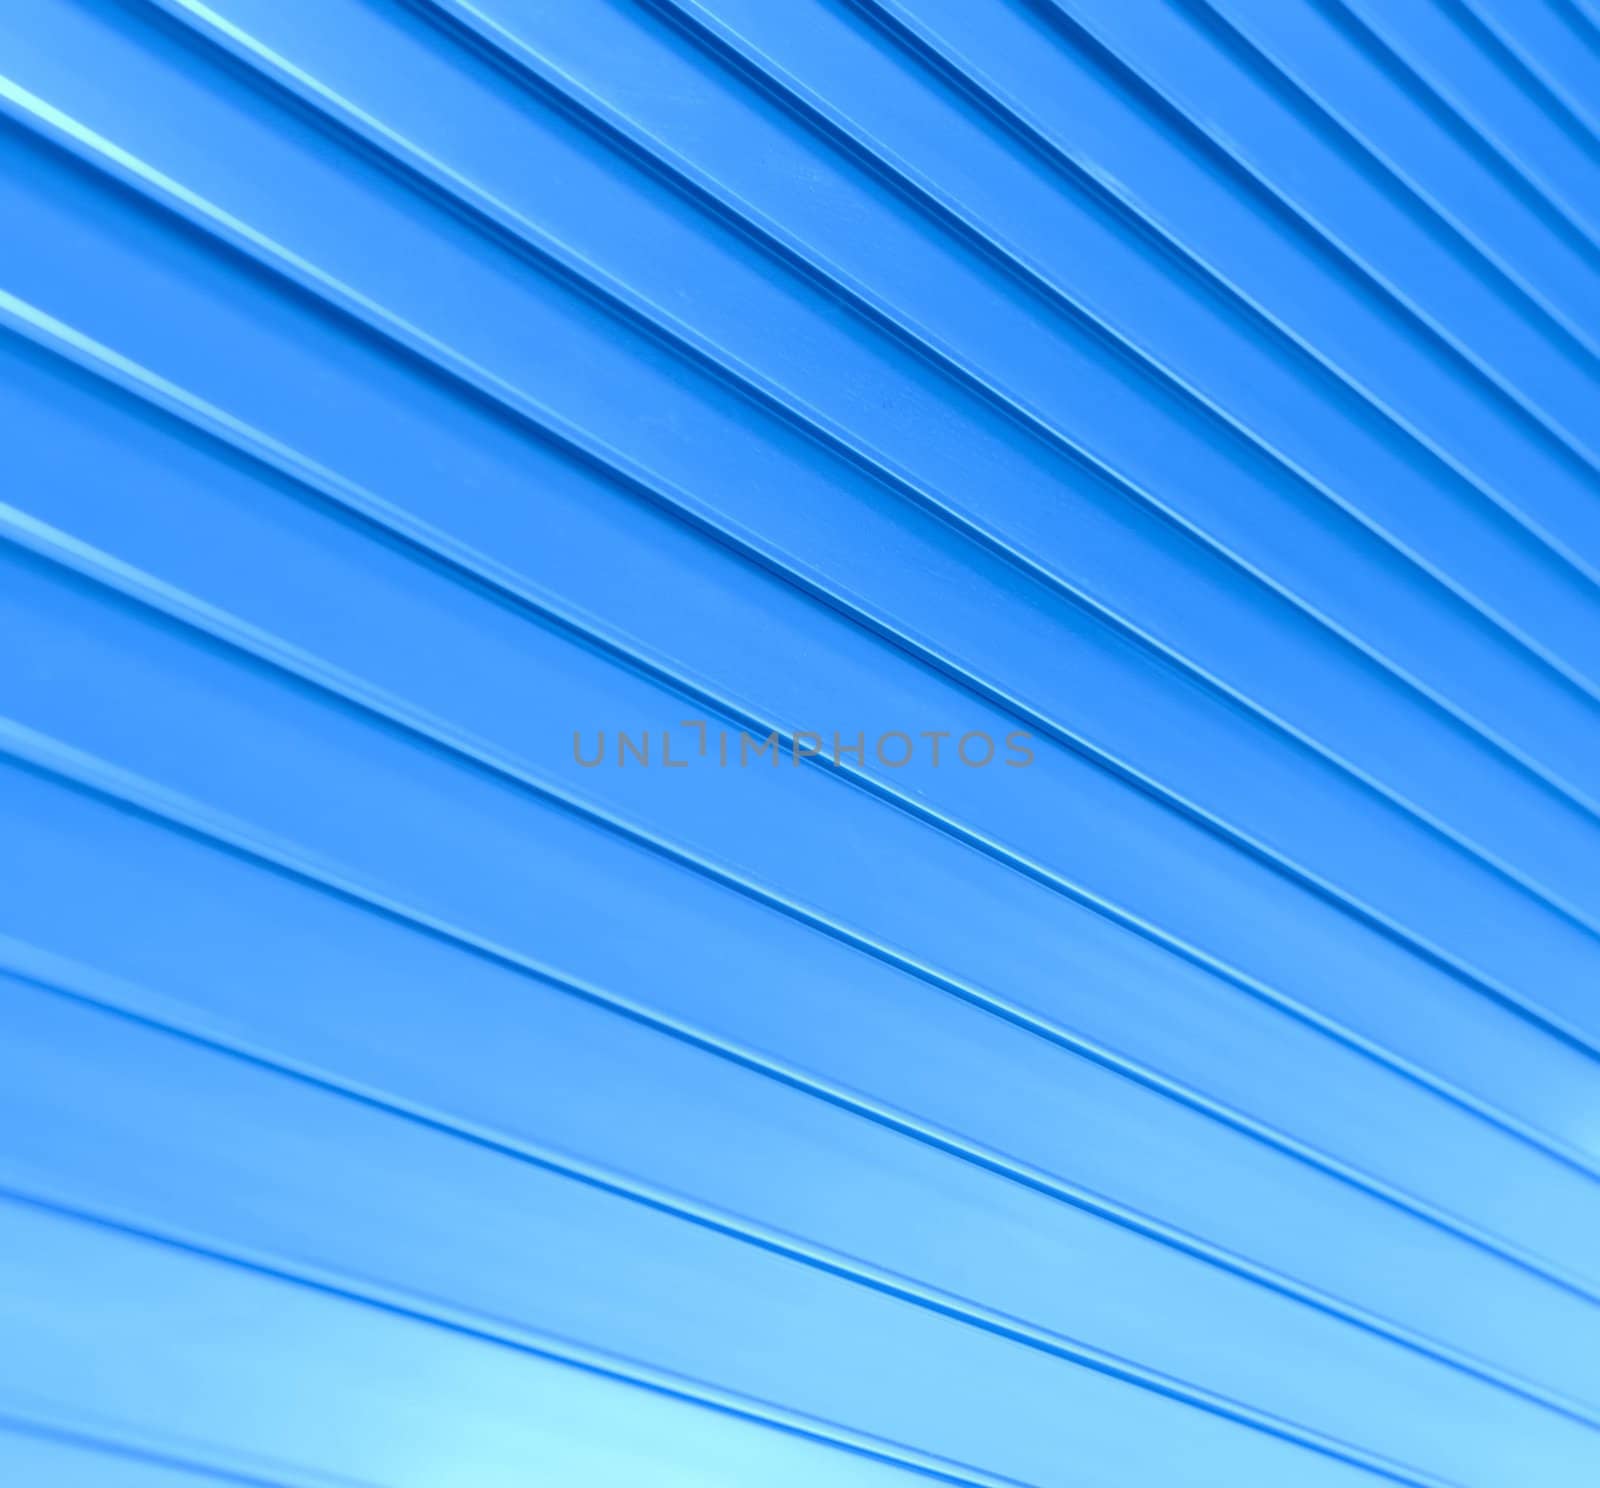 abstraction, rhythm, diagonal lines on blue background